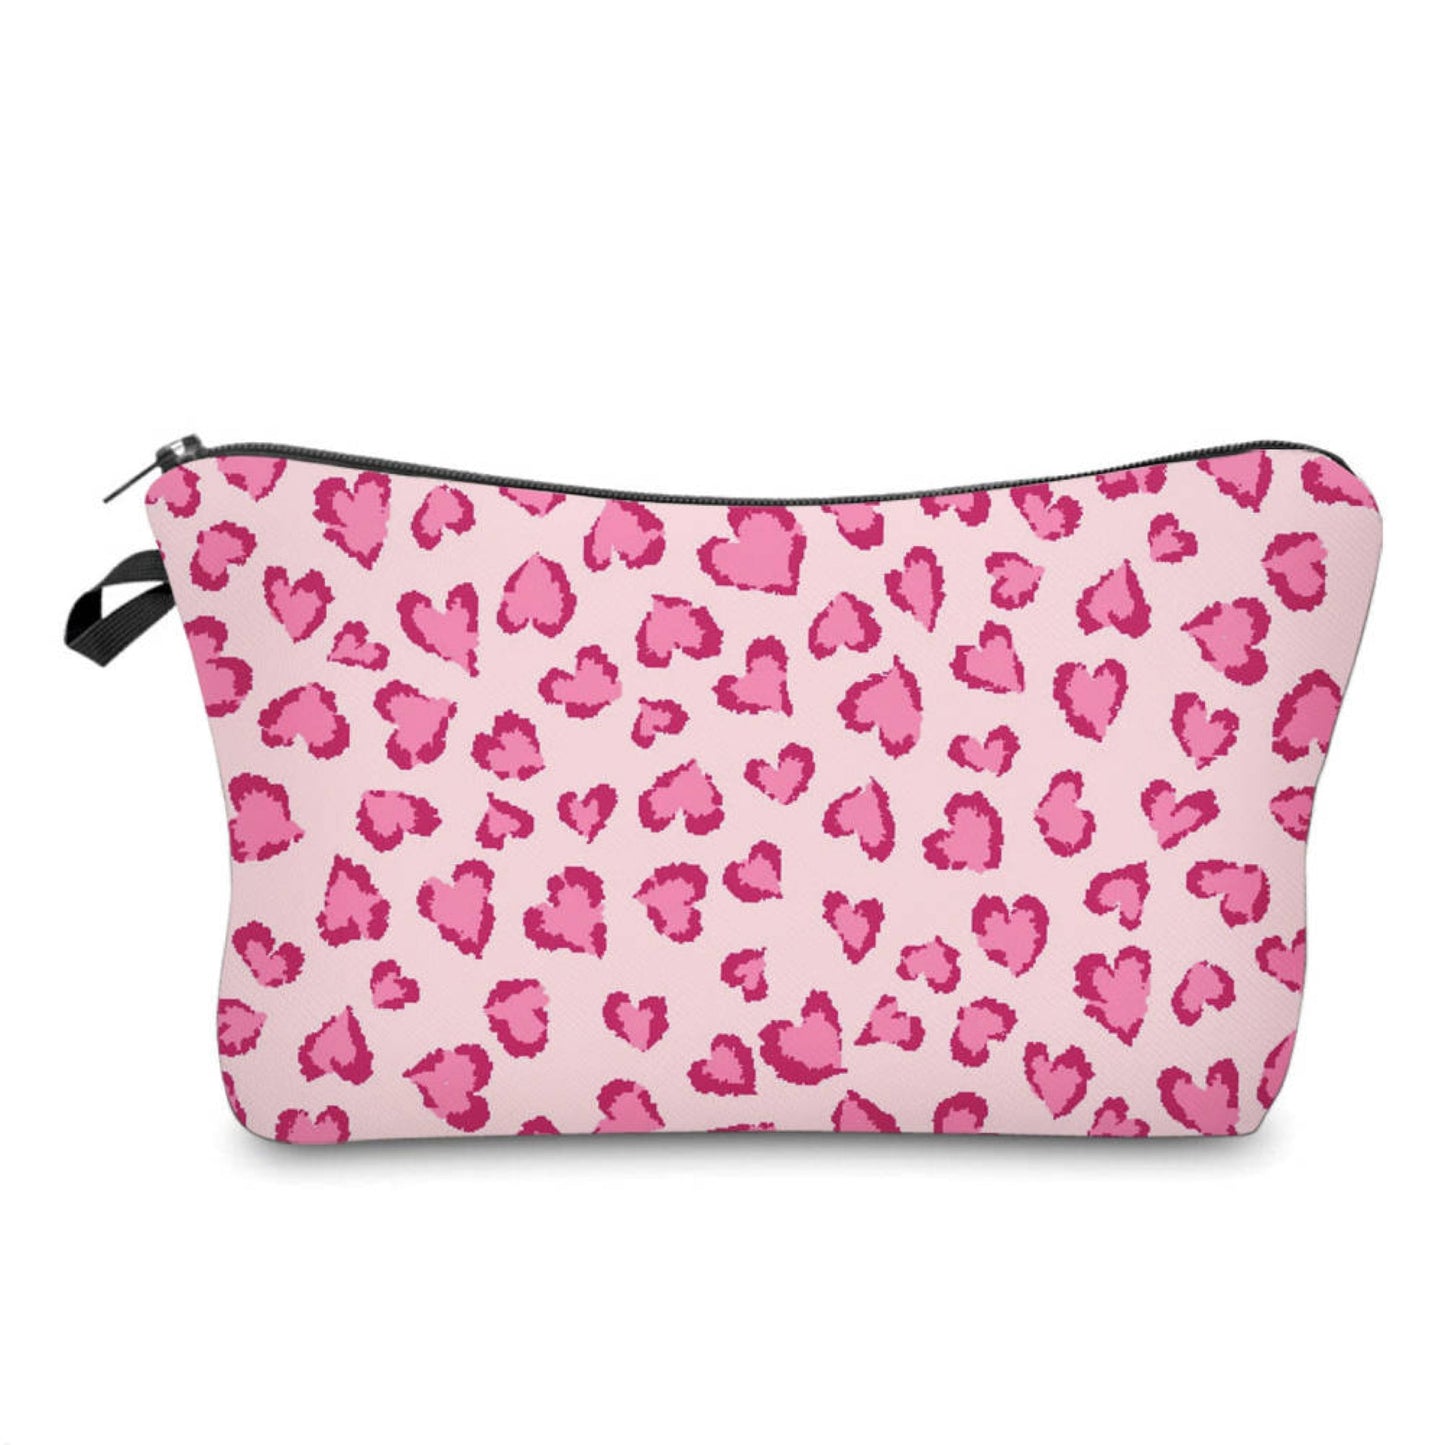 Pouch - Animal Print Pink Heart